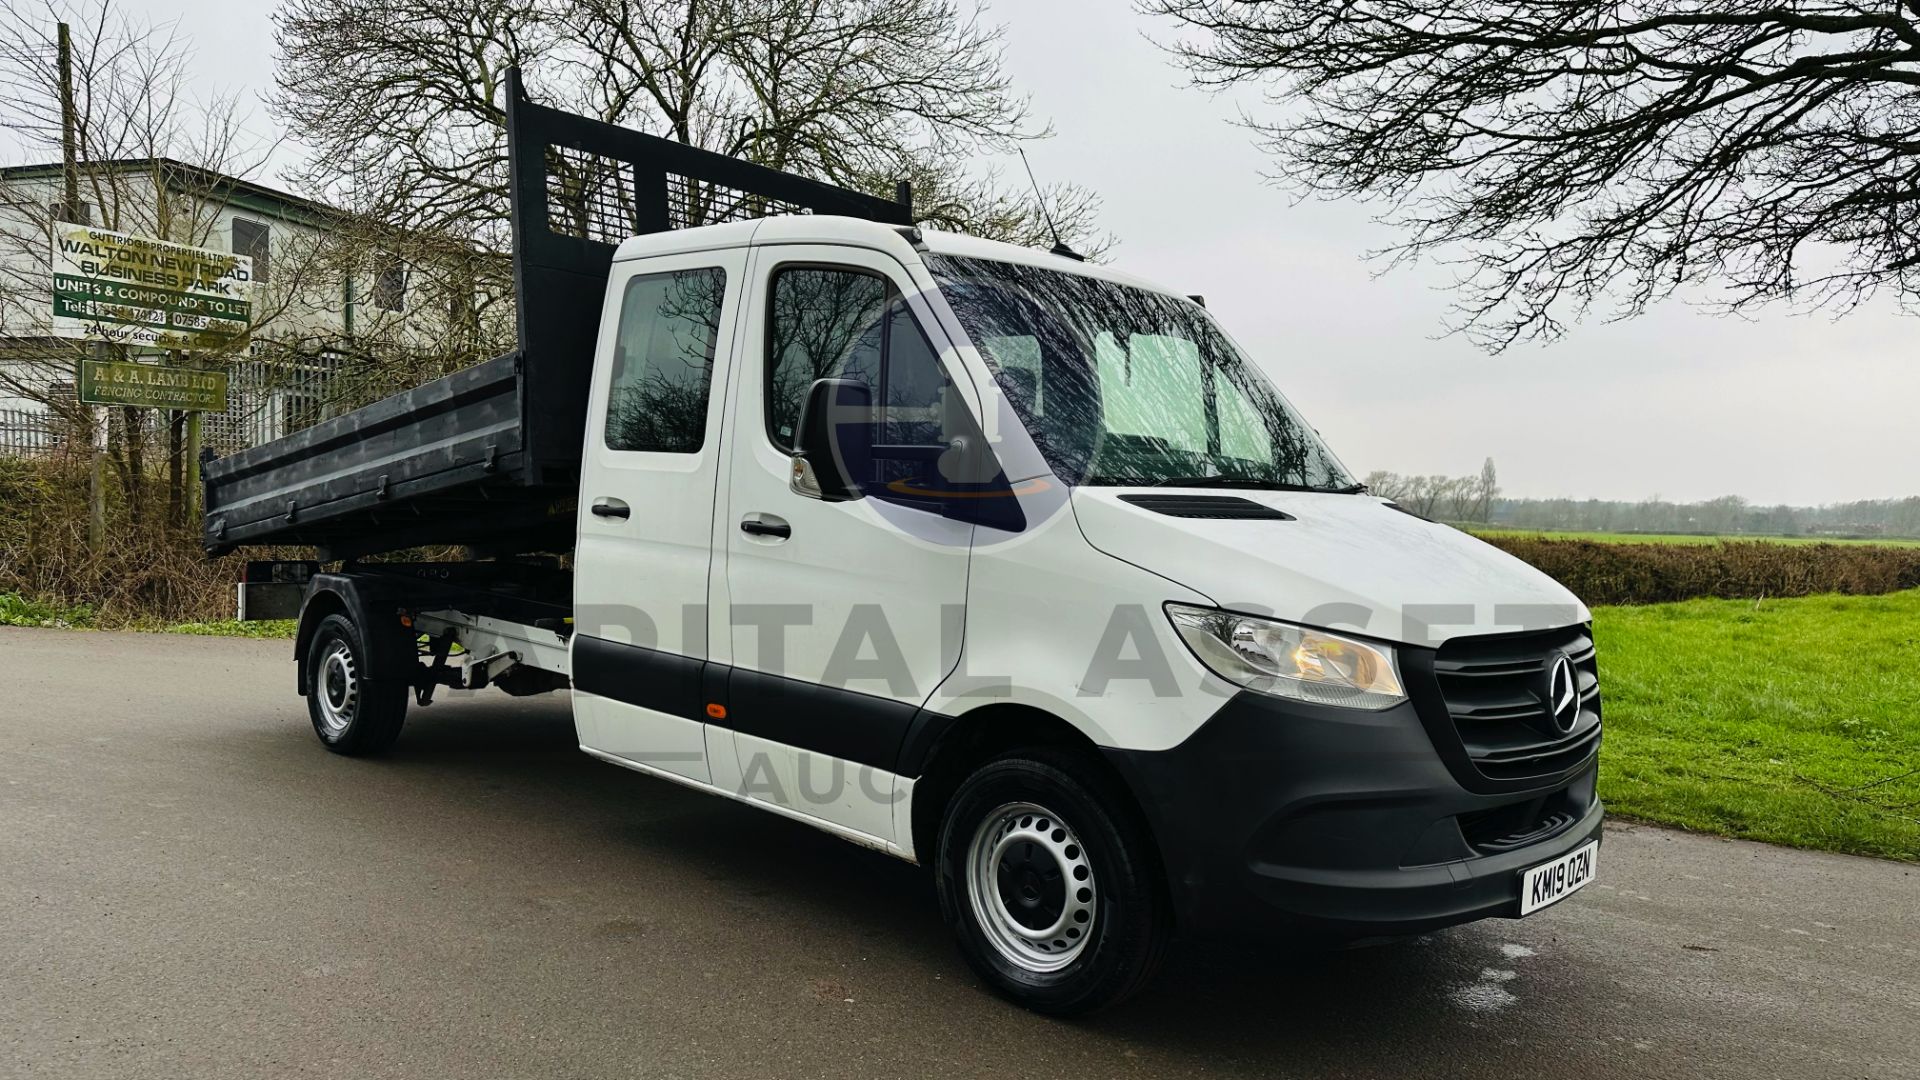 (On Sale) MERCEDES-BENZ SPRINTER 314 CDI *LWB - 7 SEATER D/CAB TIPPER* (2019 - NEW MODEL) *EURO 6* - Image 5 of 38